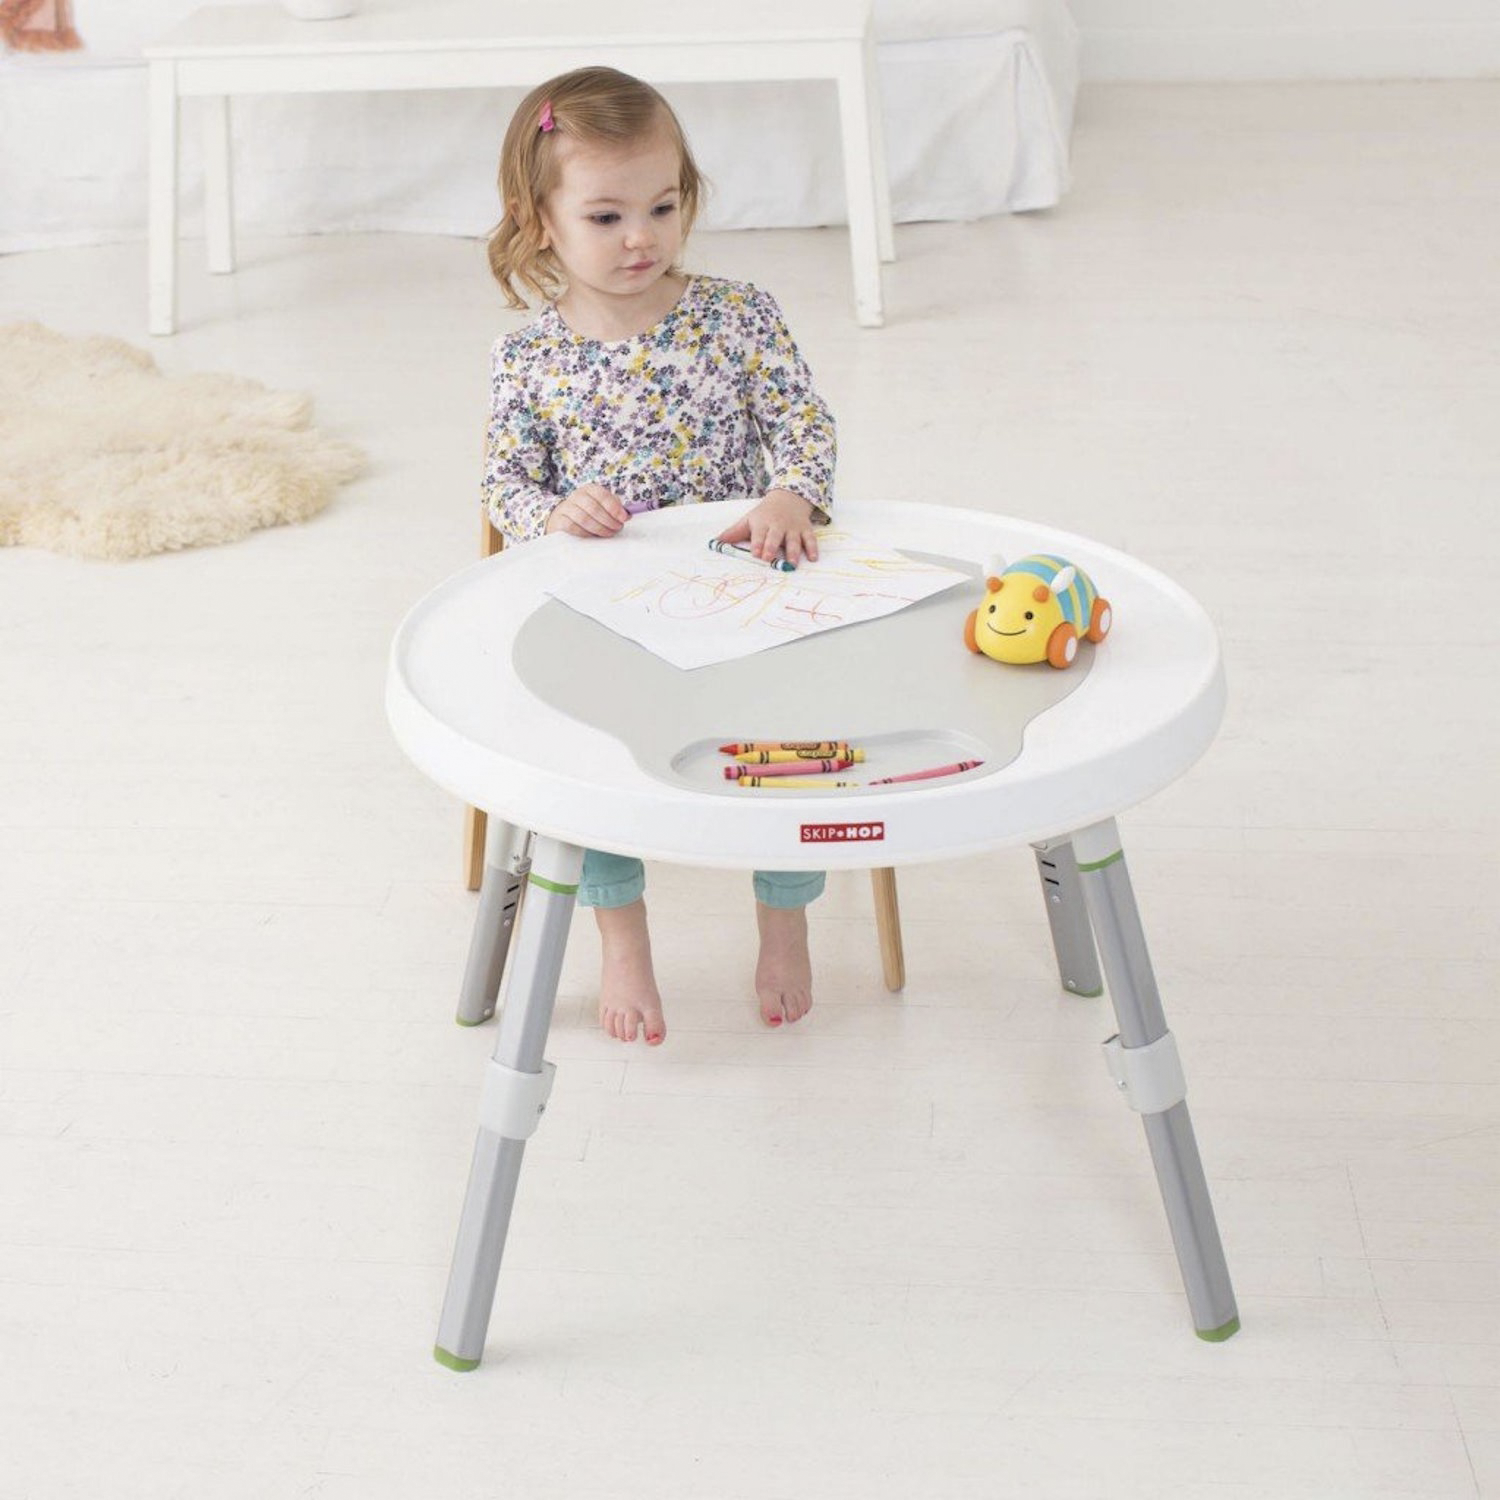 skip and hop activity table